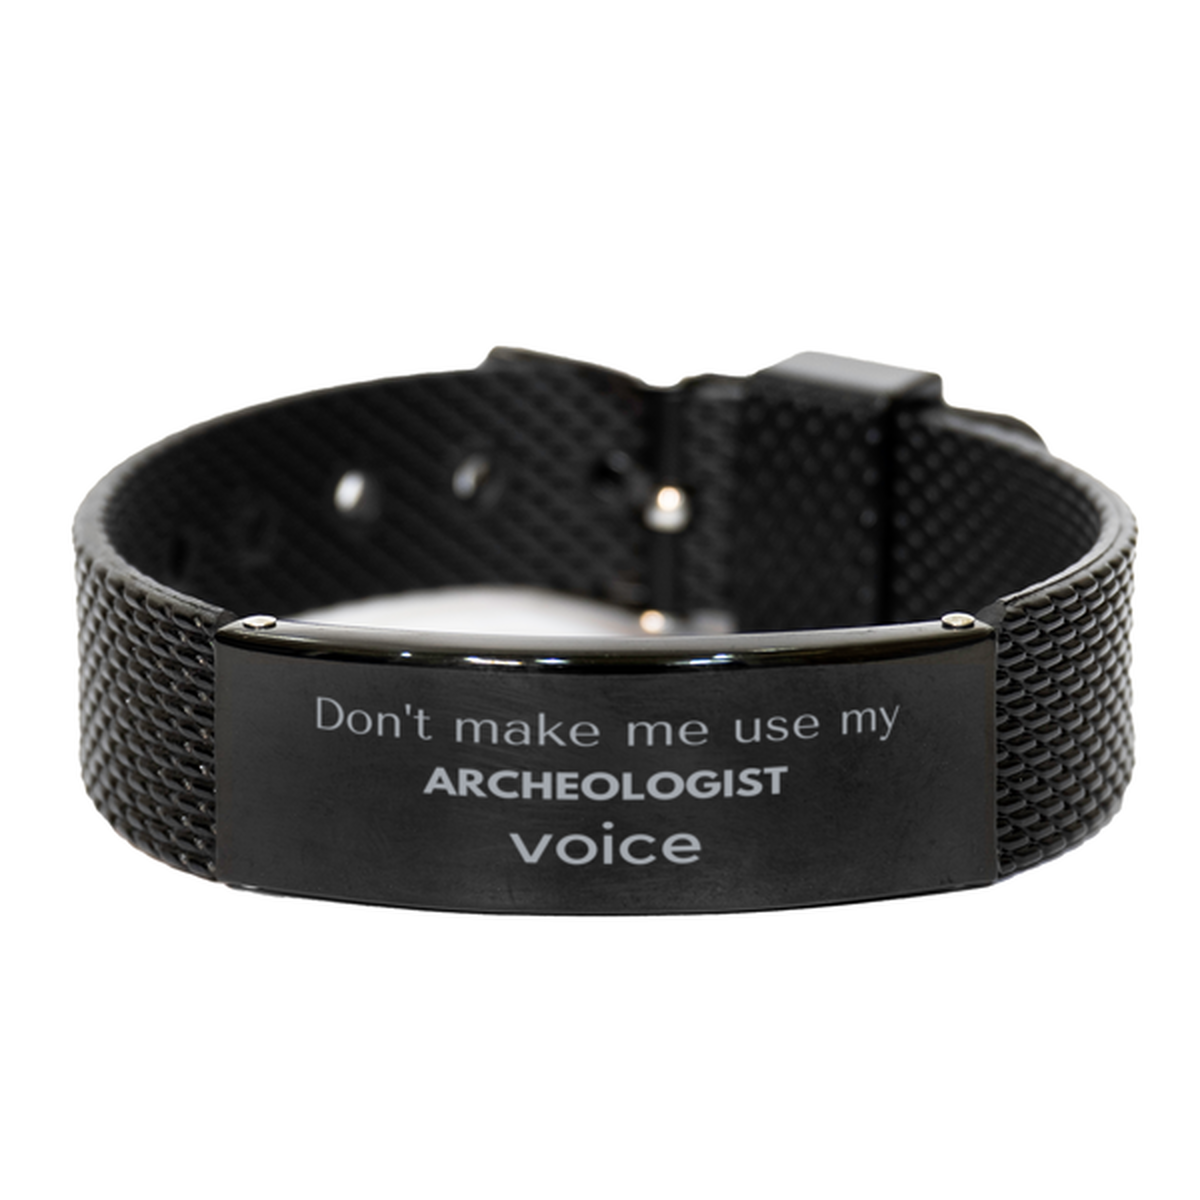 Don't make me use my Archeologist voice, Sarcasm Archeologist Gifts, Christmas Archeologist Black Shark Mesh Bracelet Birthday Unique Gifts For Archeologist Coworkers, Men, Women, Colleague, Friends